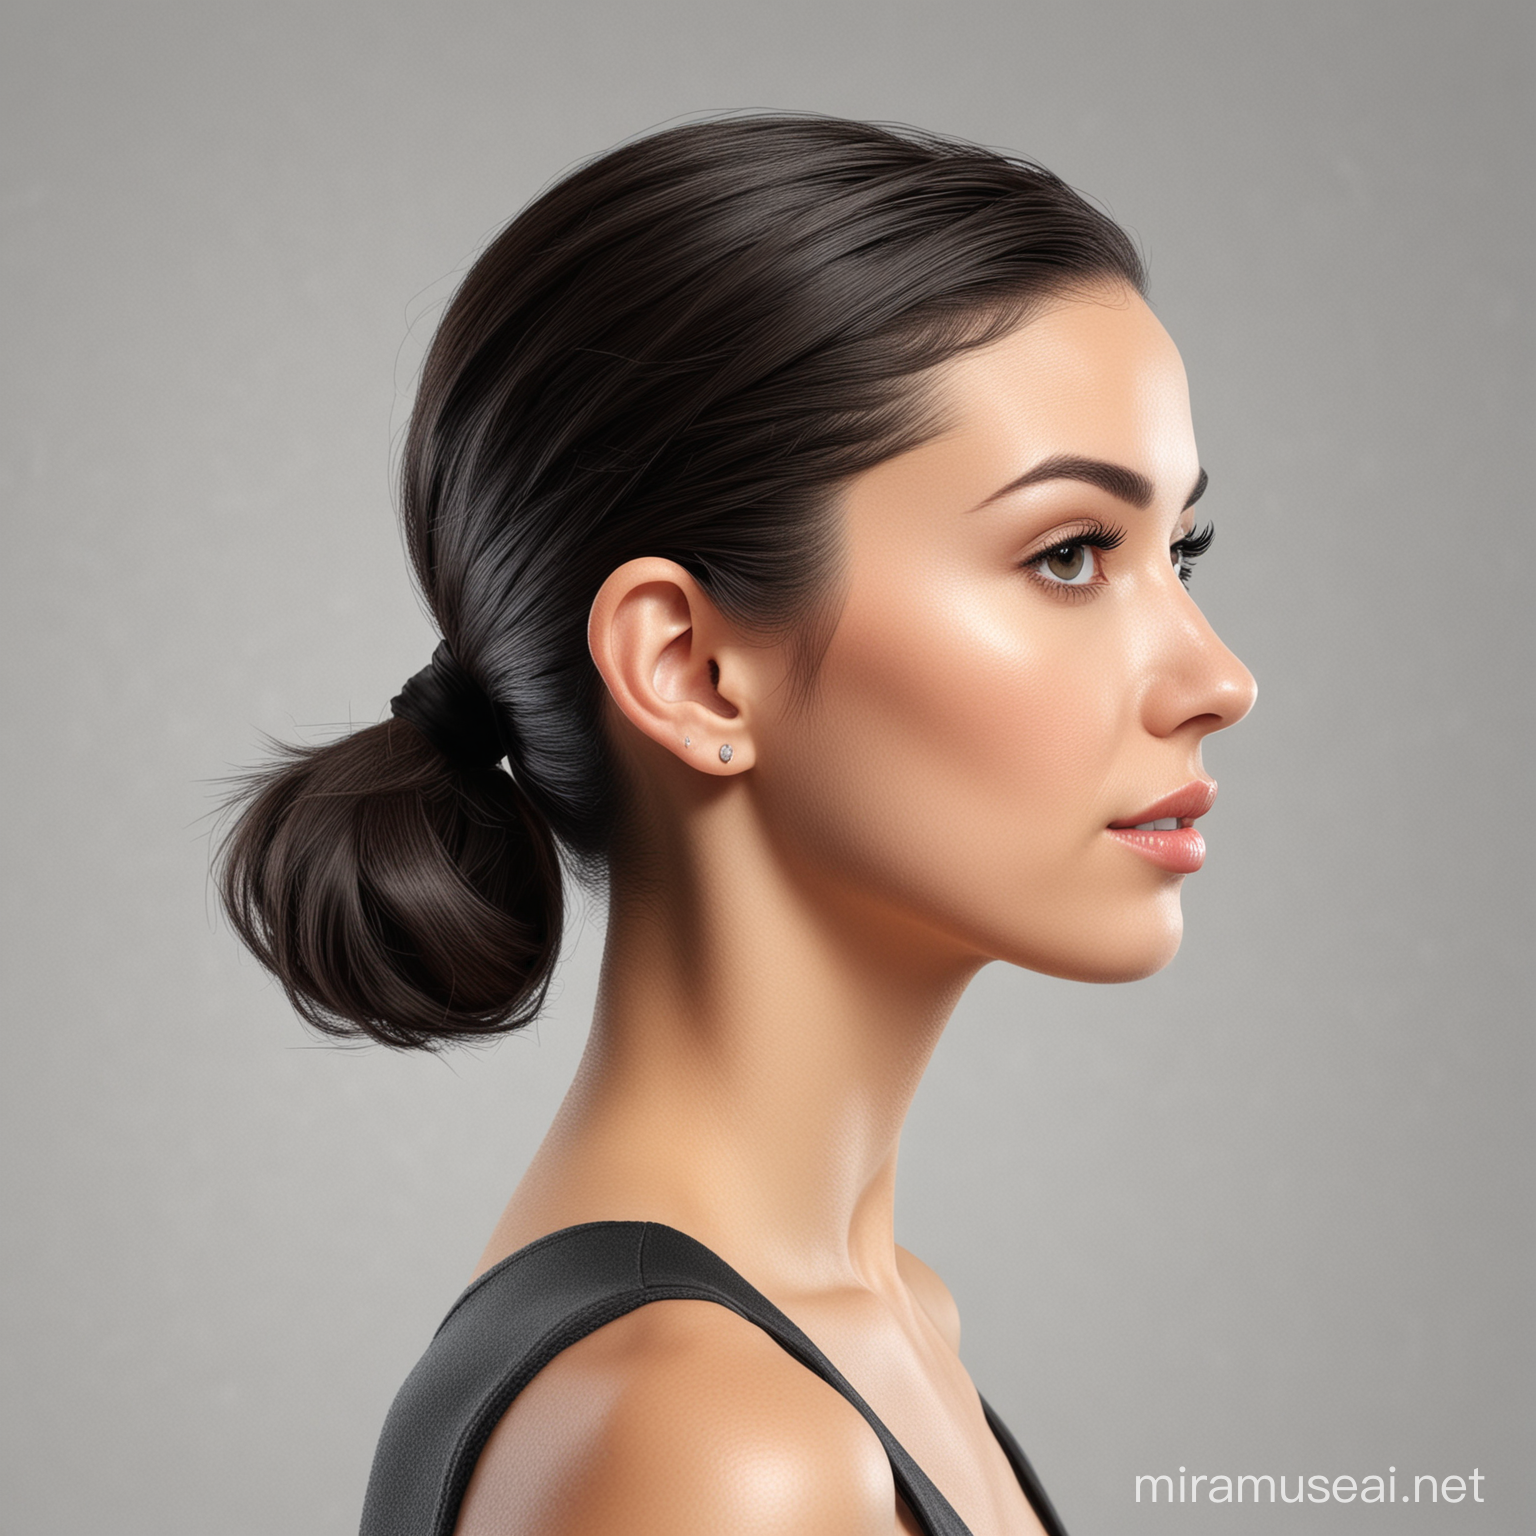 Create a realistic 3d portrait side profile of a female with a very short dark bob hair tight ponytail on a white background
